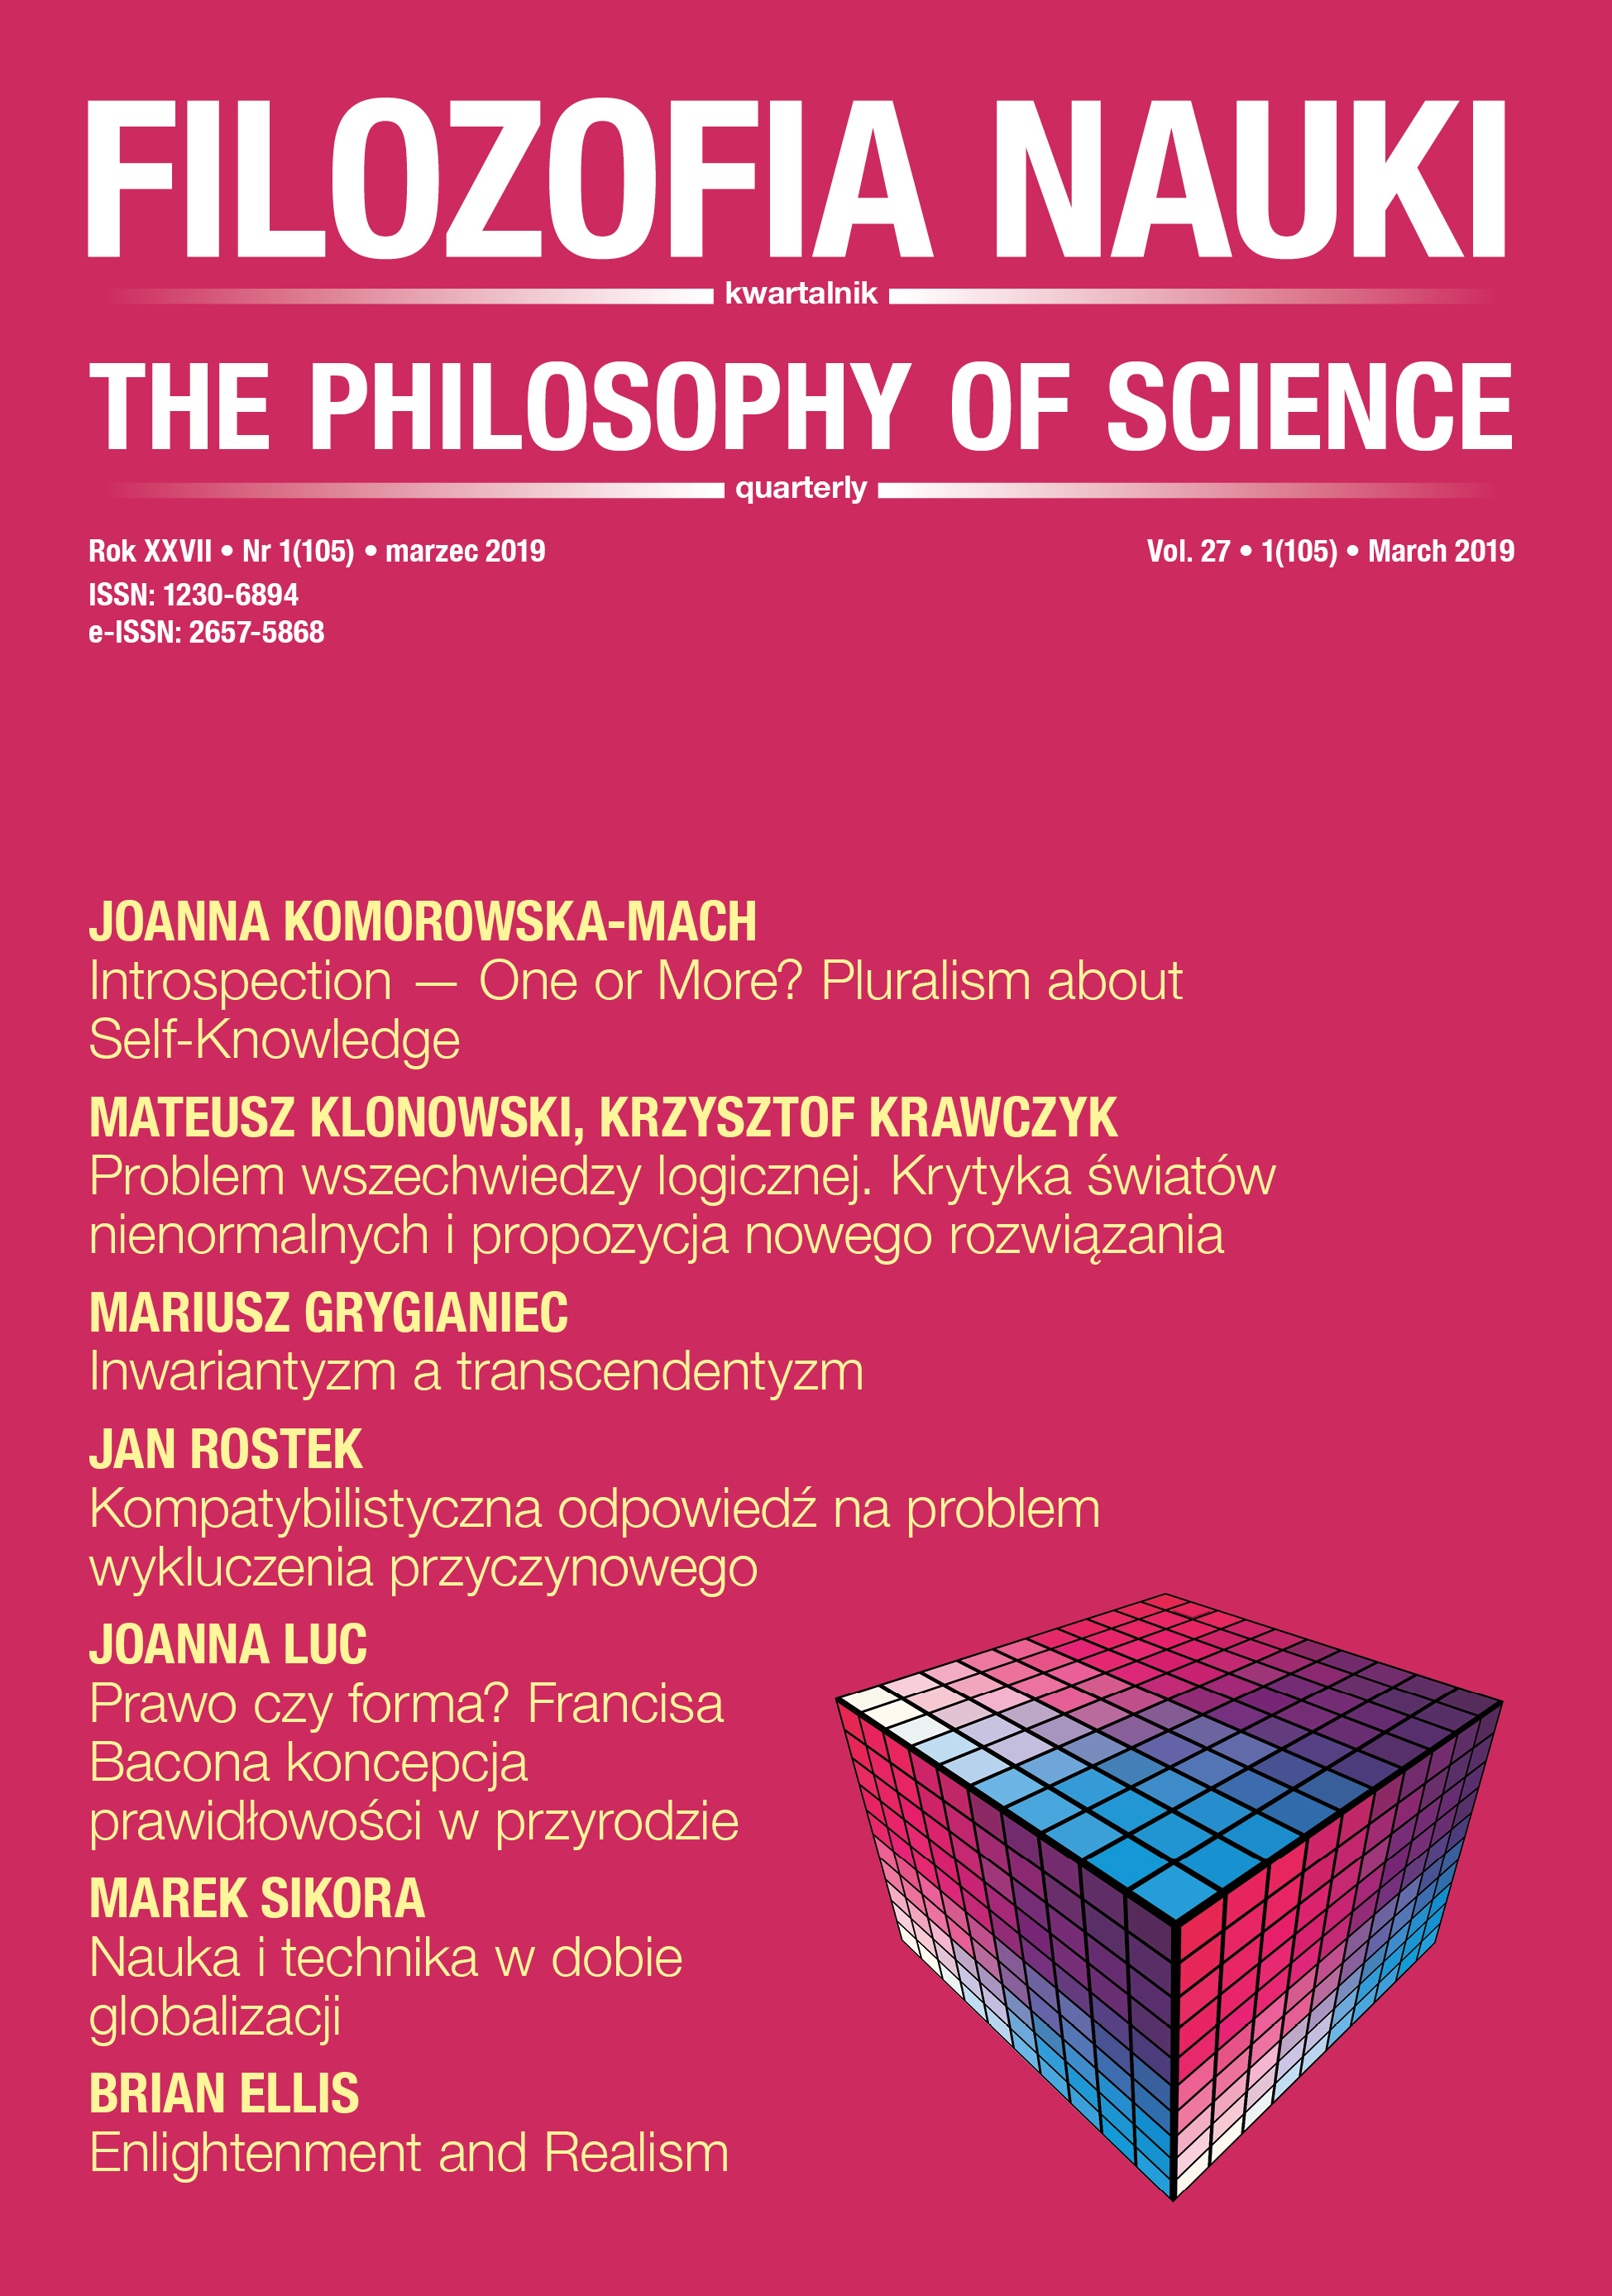 					View Vol. 27 No. 1 (2019): THE PHILOSOPHY OF SCIENCE
				